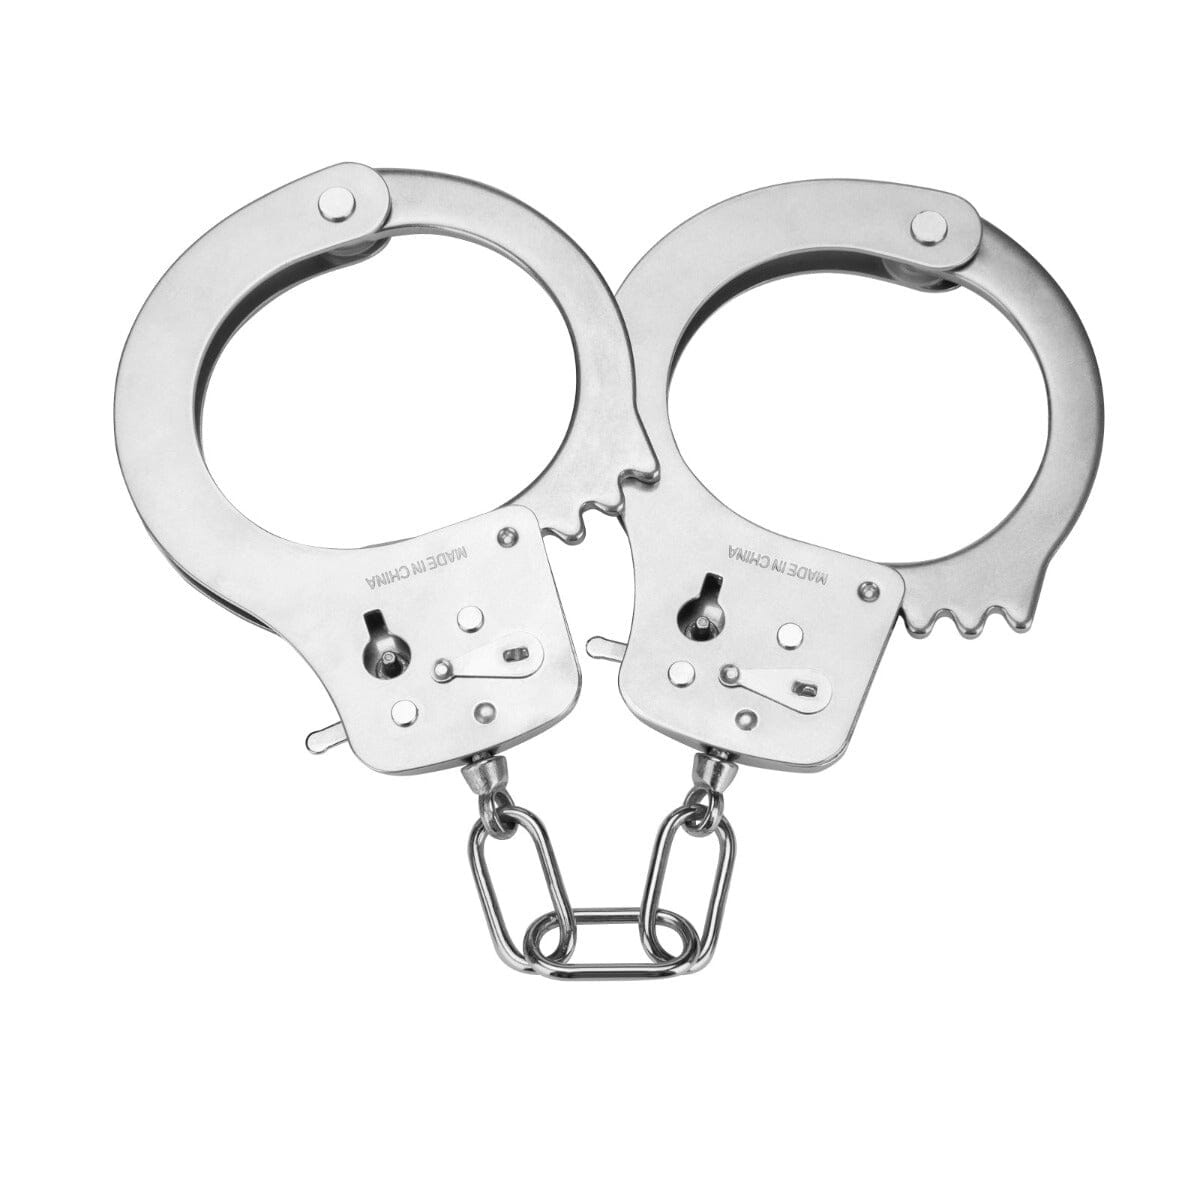 a pair of handcuffs that are attached to each other